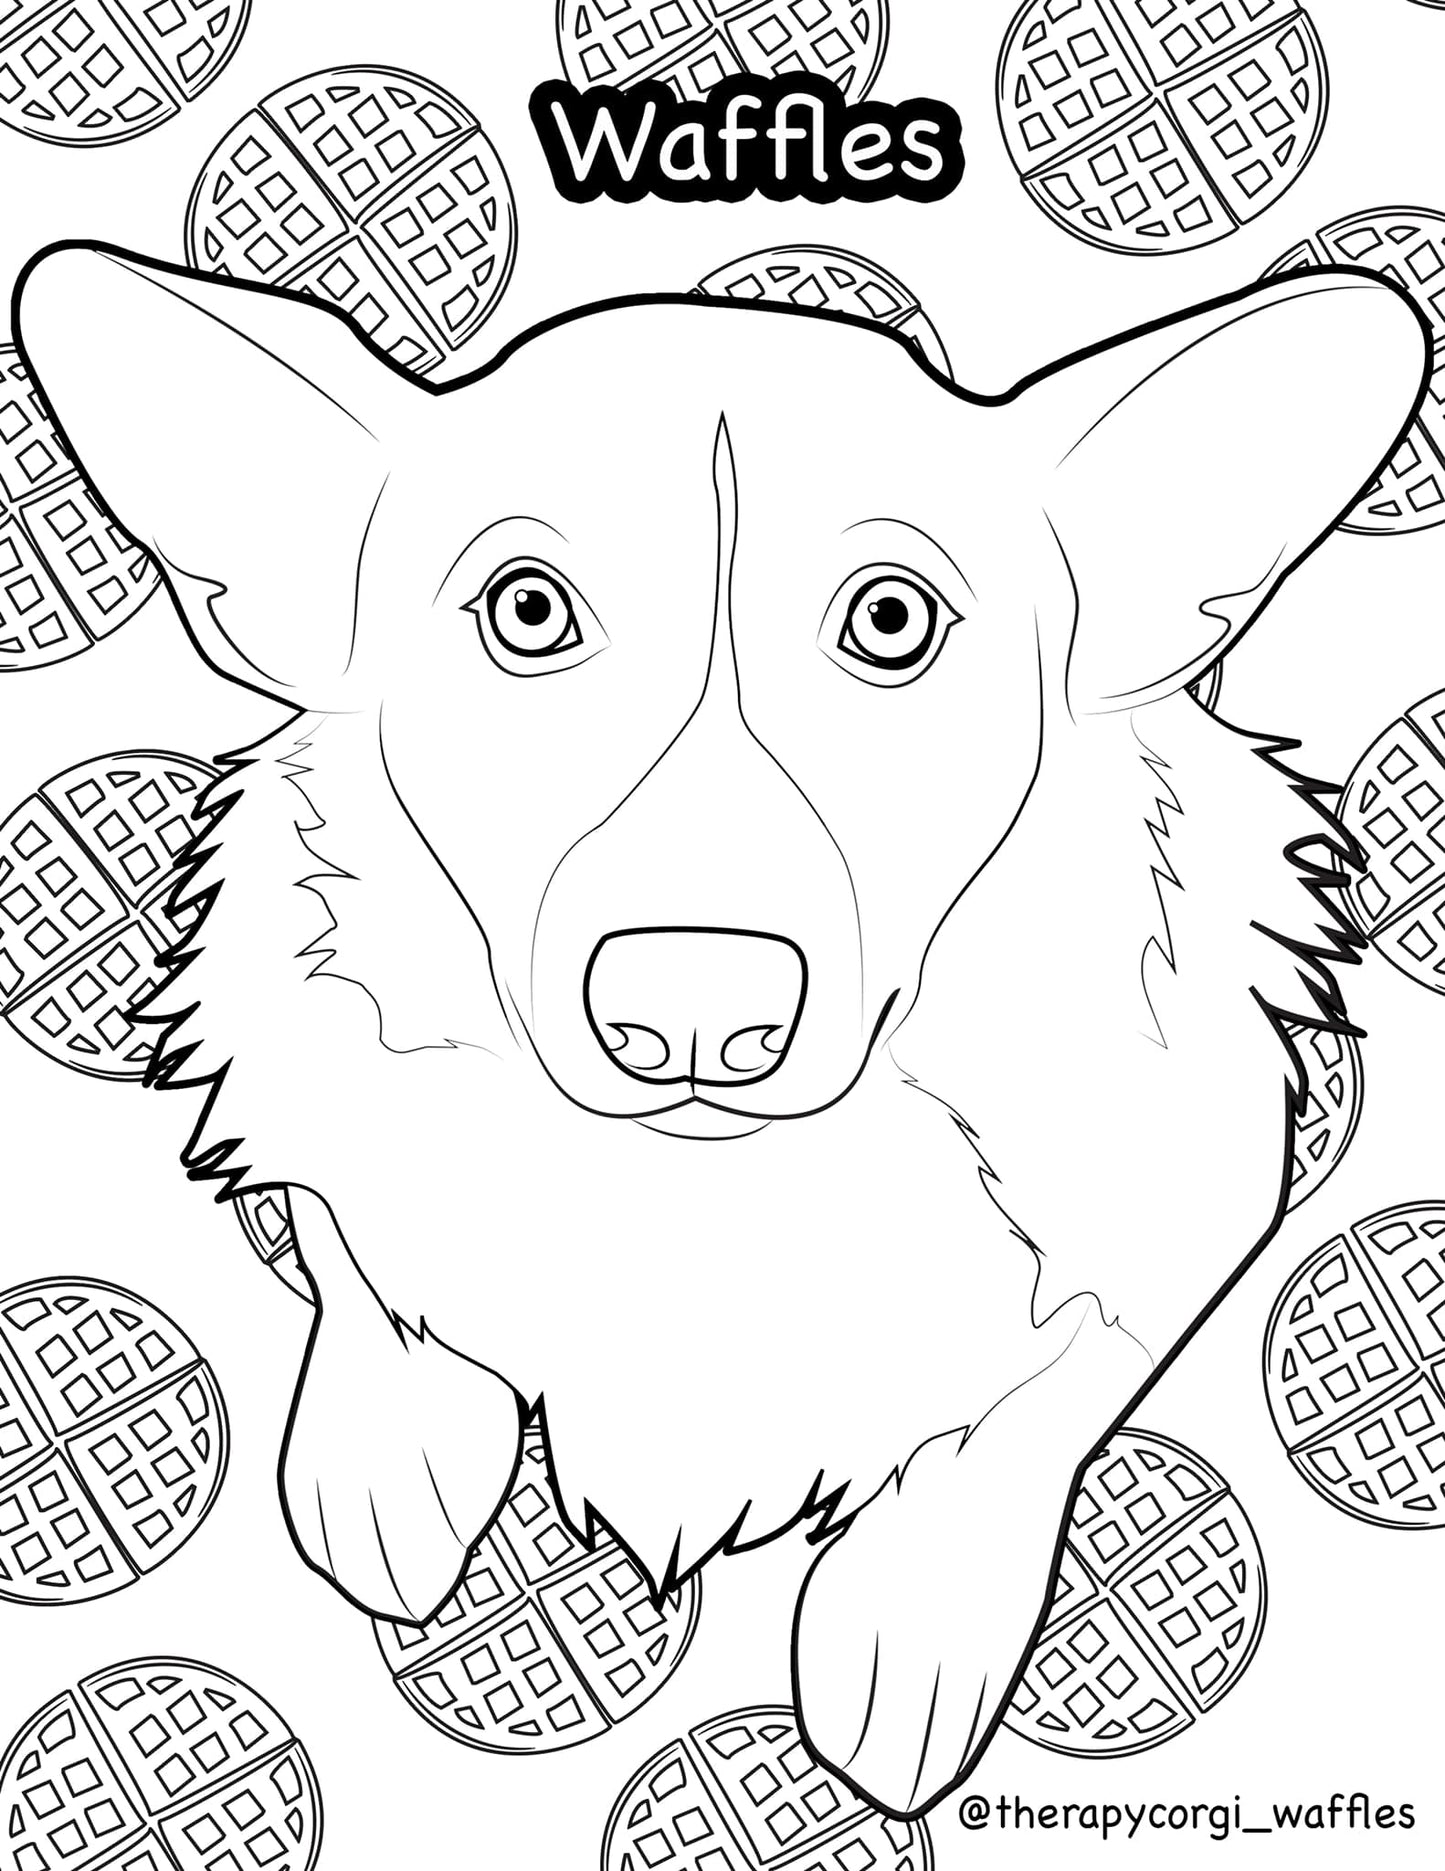 Coloring Page Of Your Pet